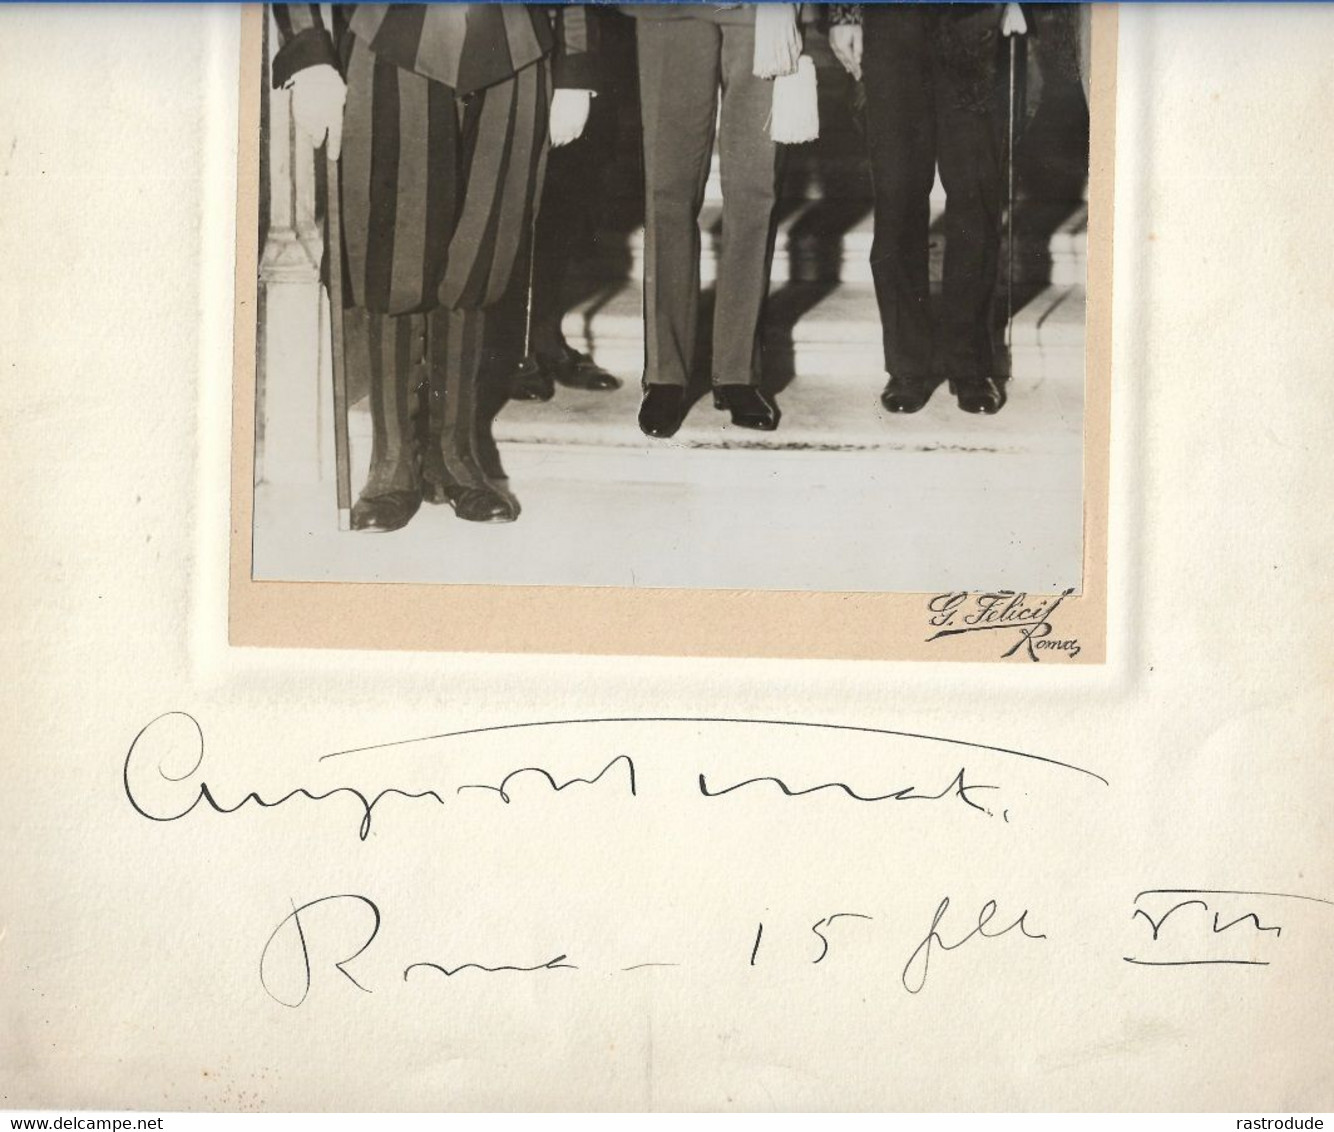 1930s ORIGINAL PHOTOGRAPH Of AUGUSTO TURATI In The VATICAN W. SWISS GUARD By GIUSEPPE FELICI - SIGNED - Fotos Dedicadas